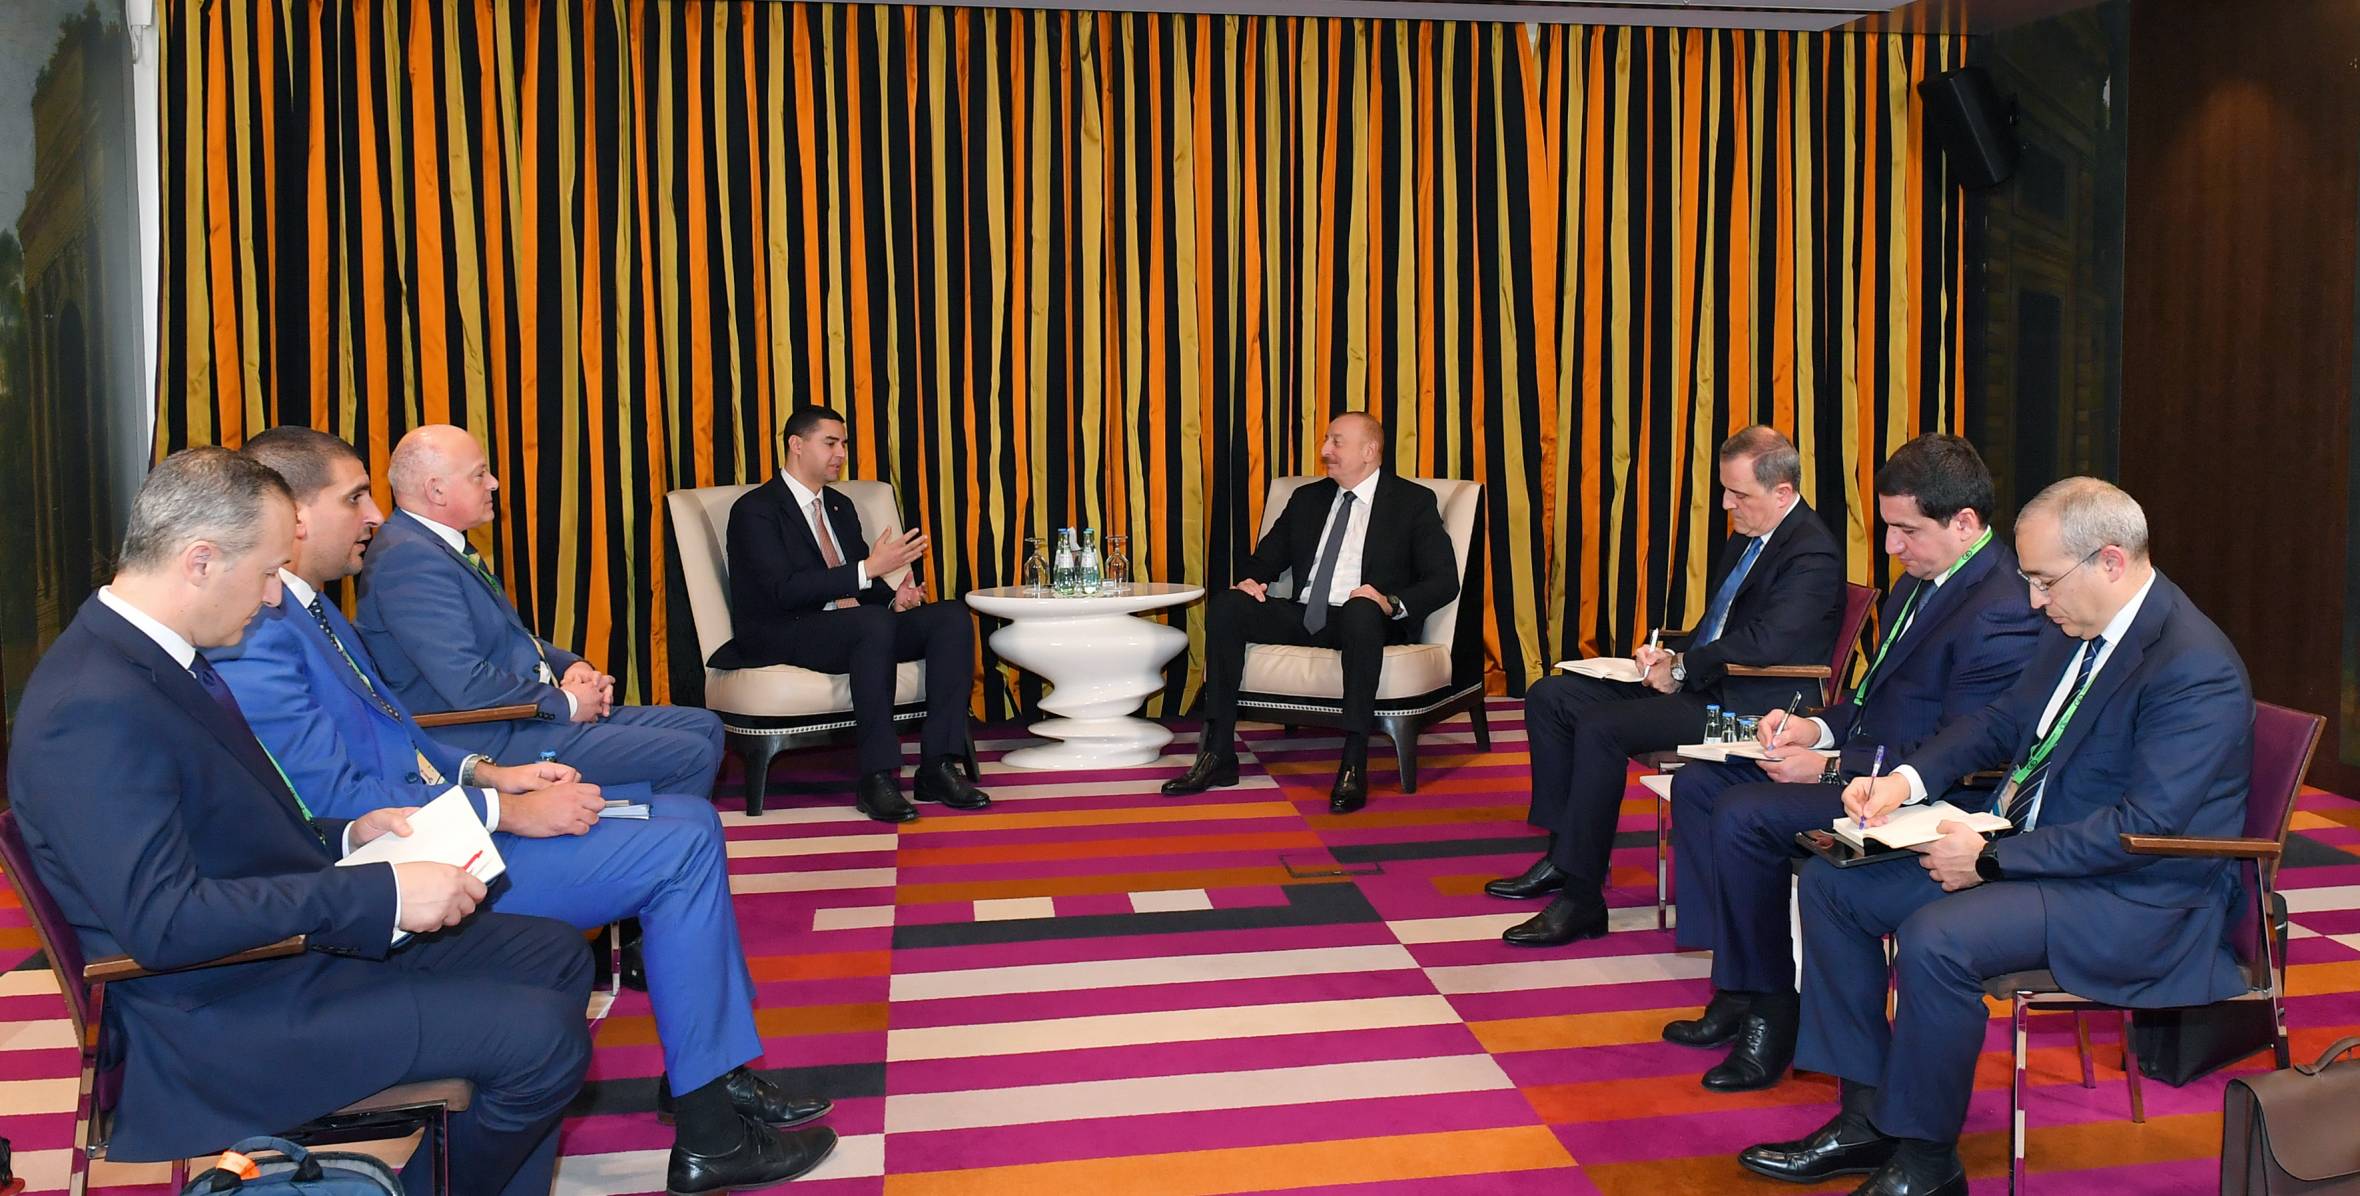 Ilham Aliyev met with OSCE Chair-in-Office Ian Borg